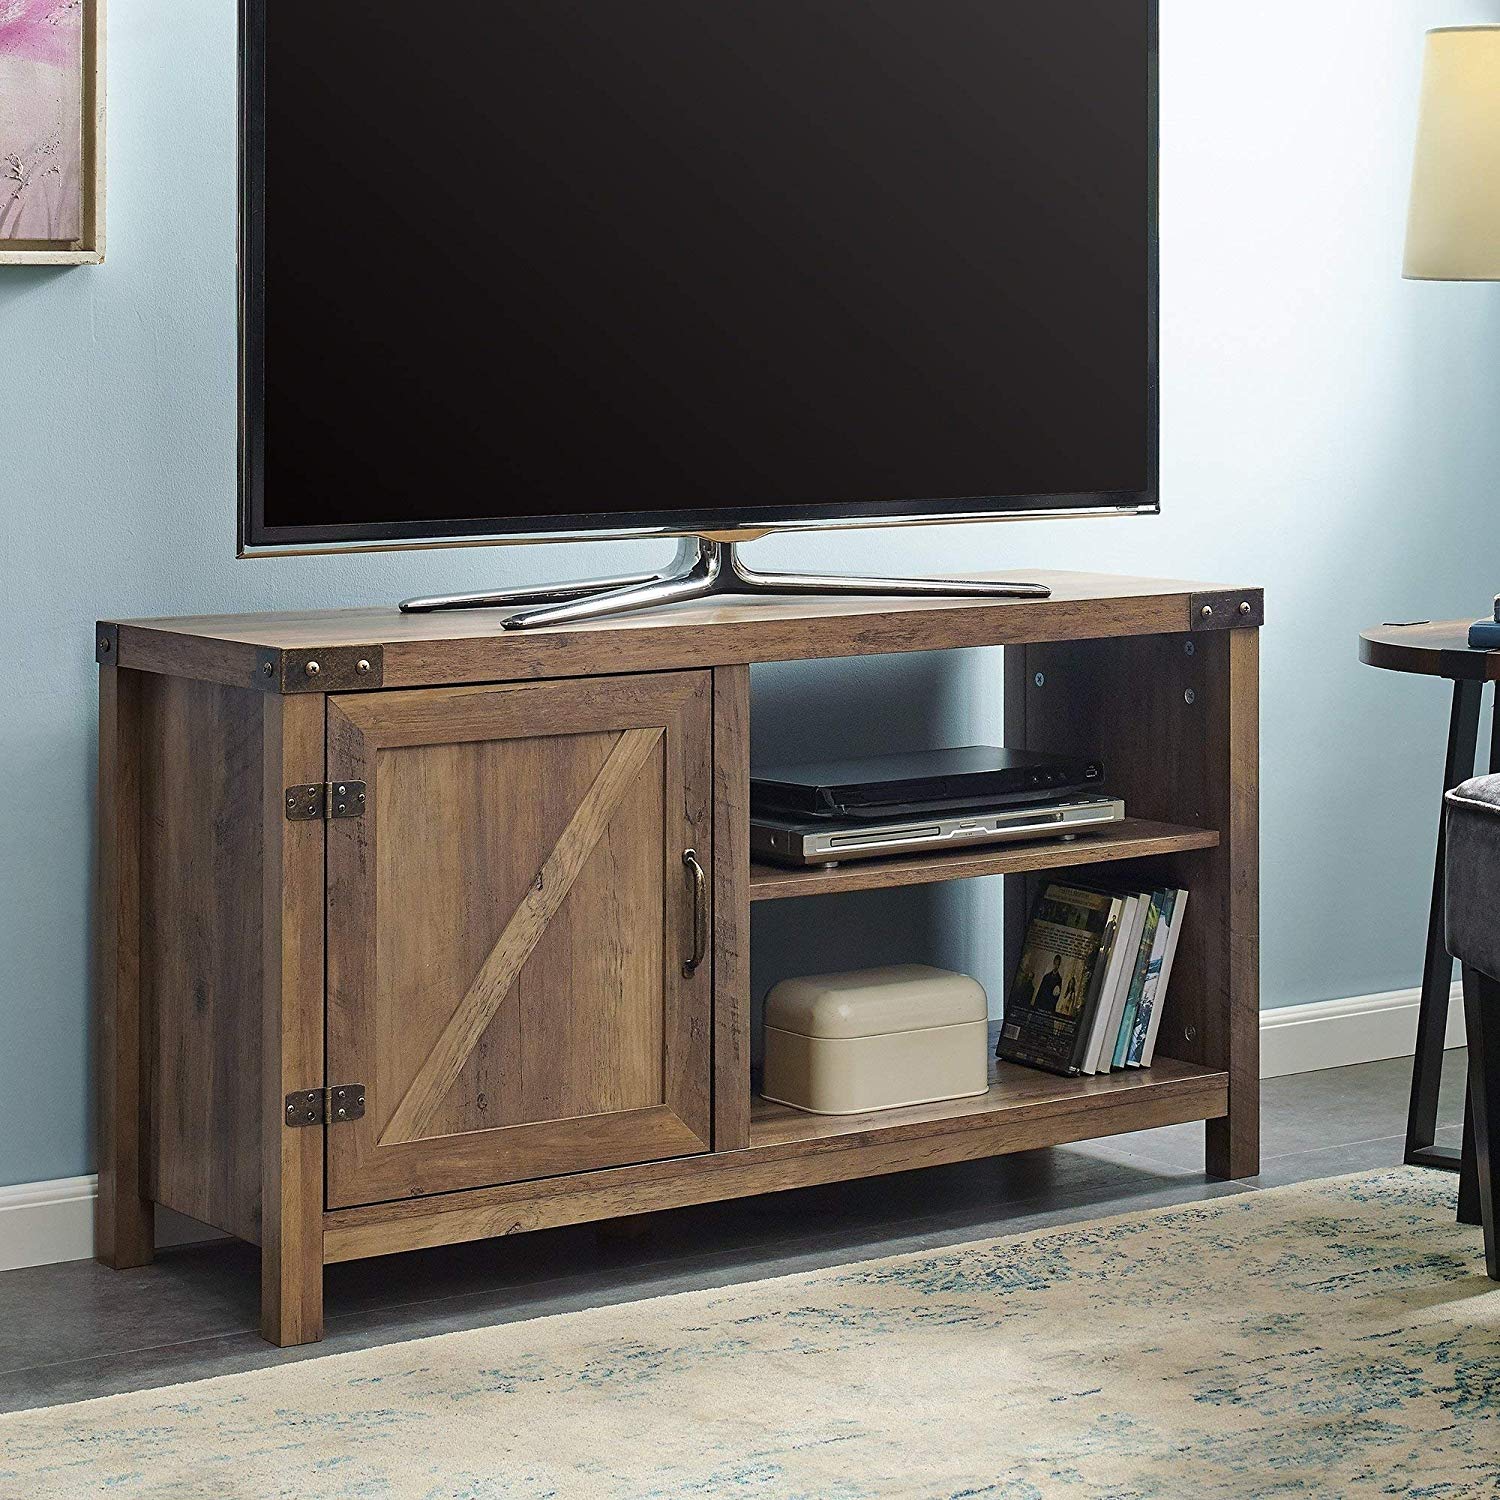 Farmhouse Tv Stand with Fireplace Luxury Amazon Overstock 44" Barn Door Tv Stand Console 44 X